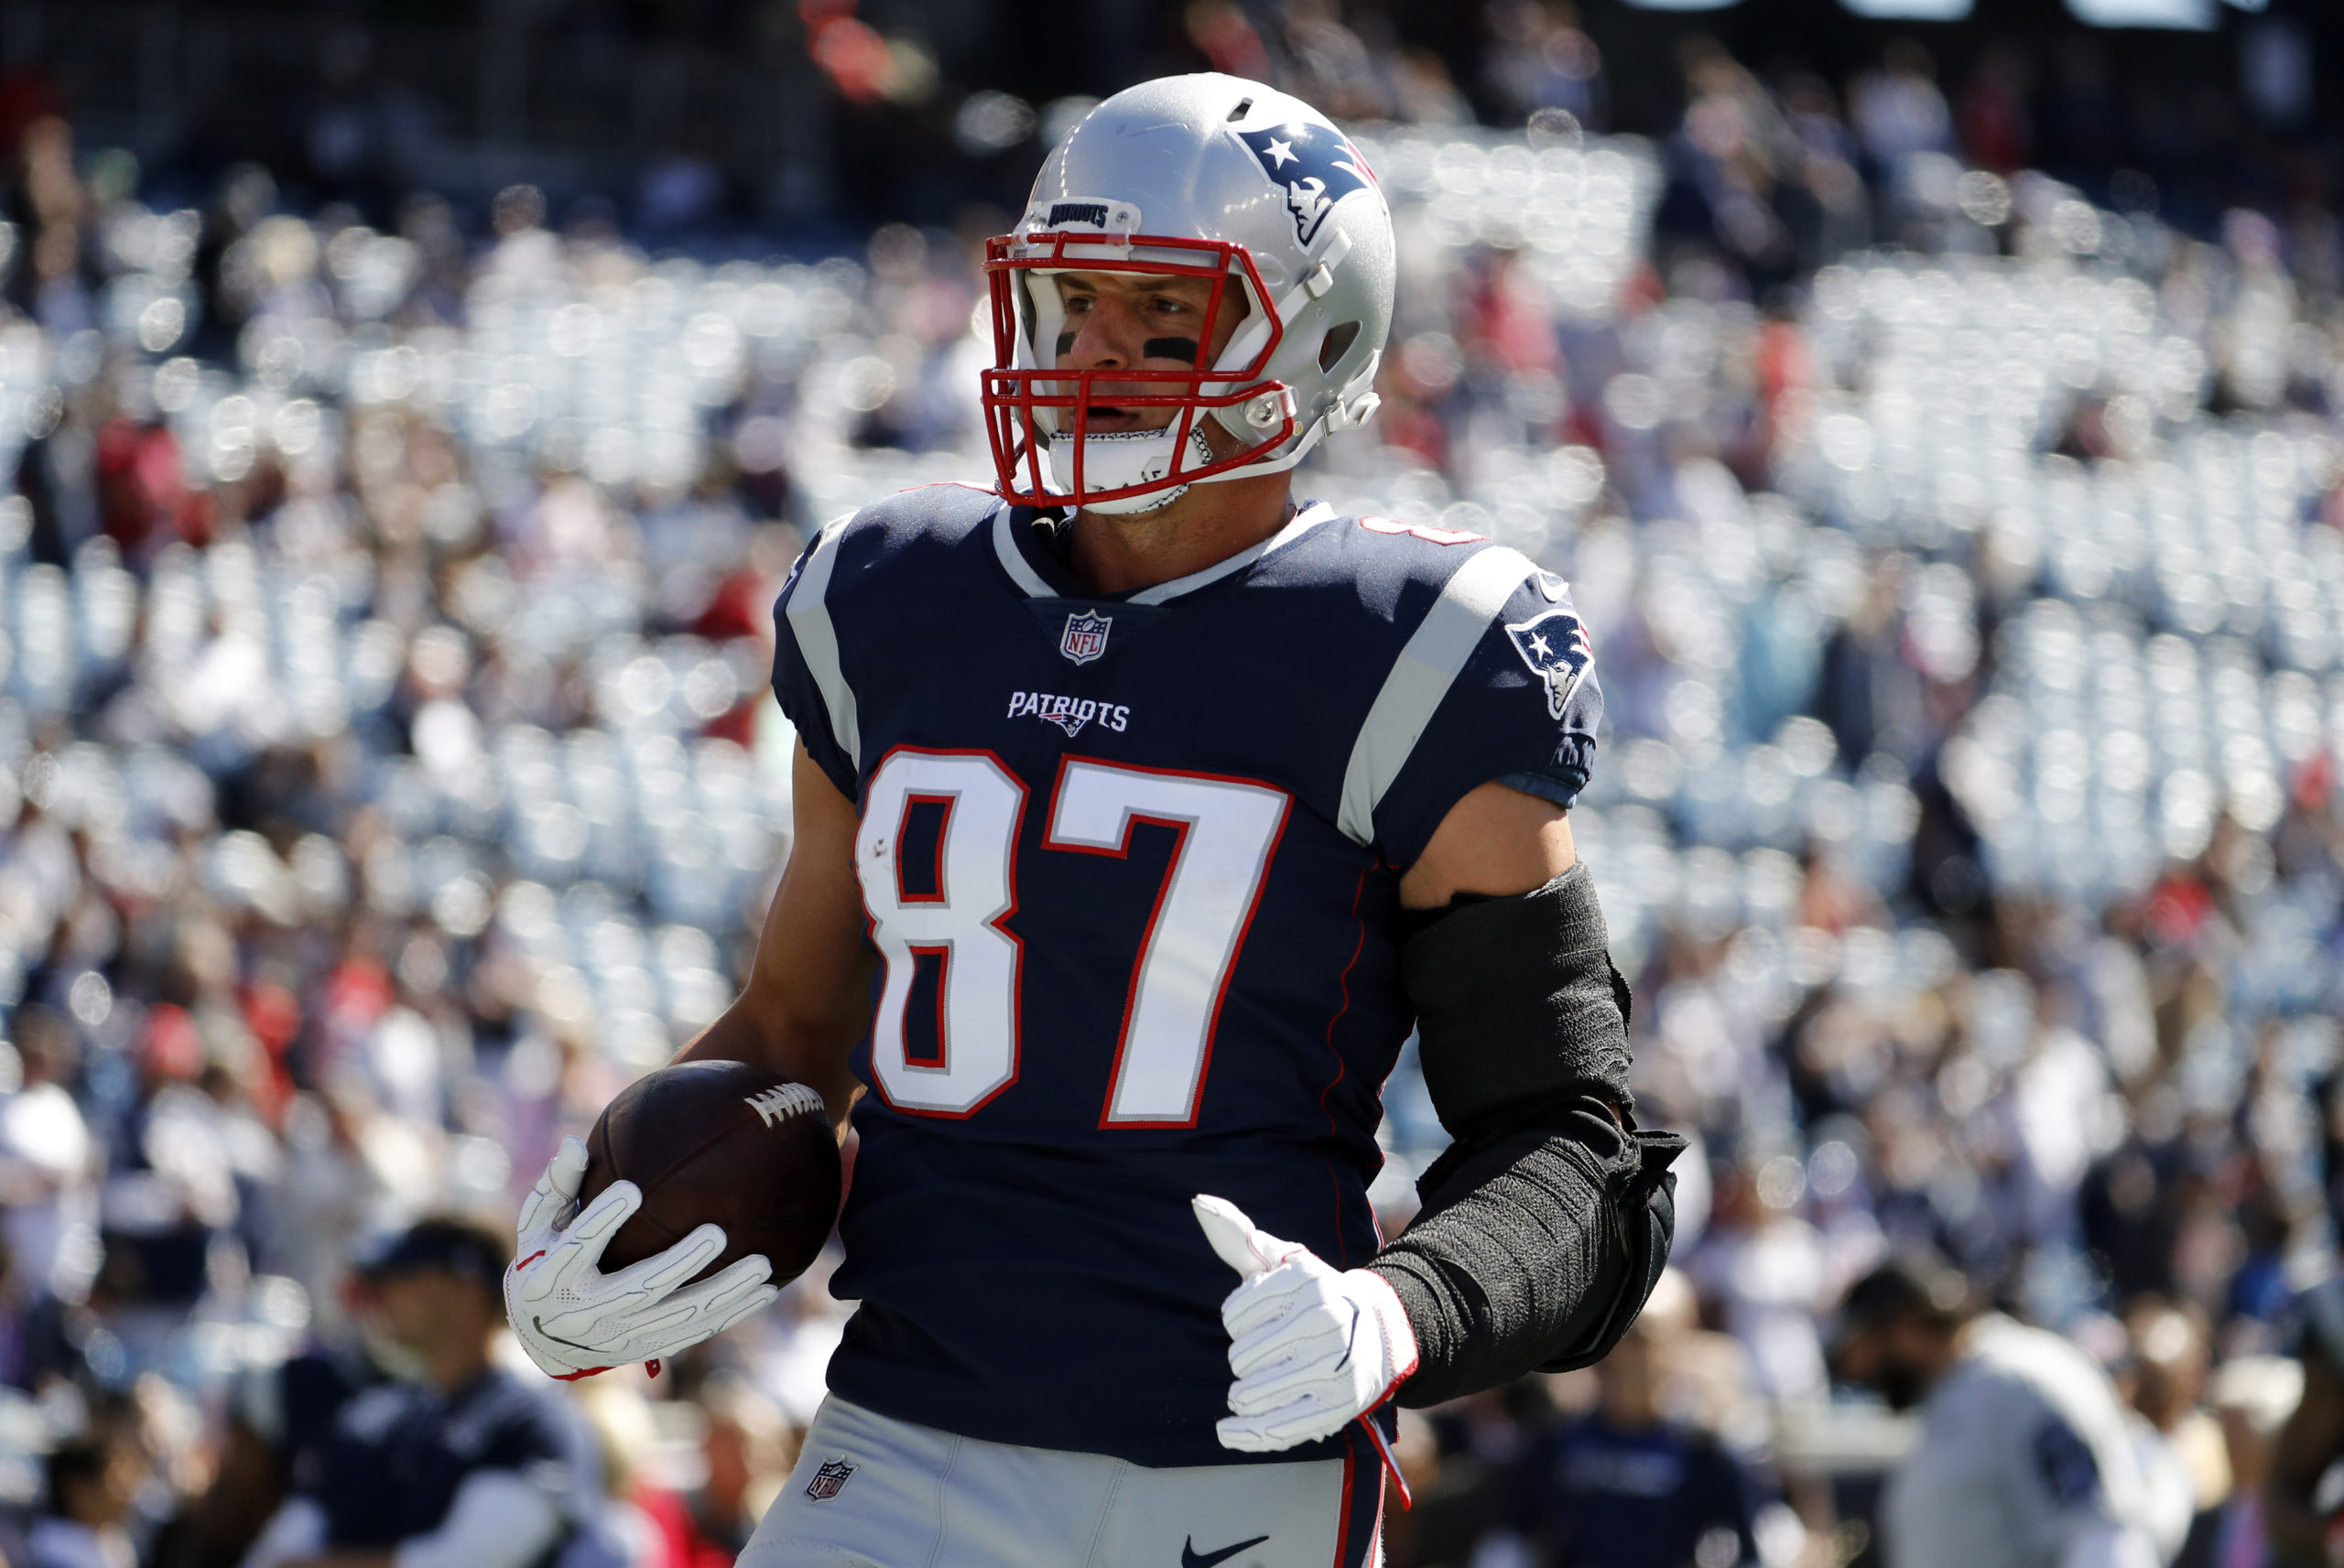 Gronk's "Kick of Destiny" is Giving Away 10,000,000 During The Super